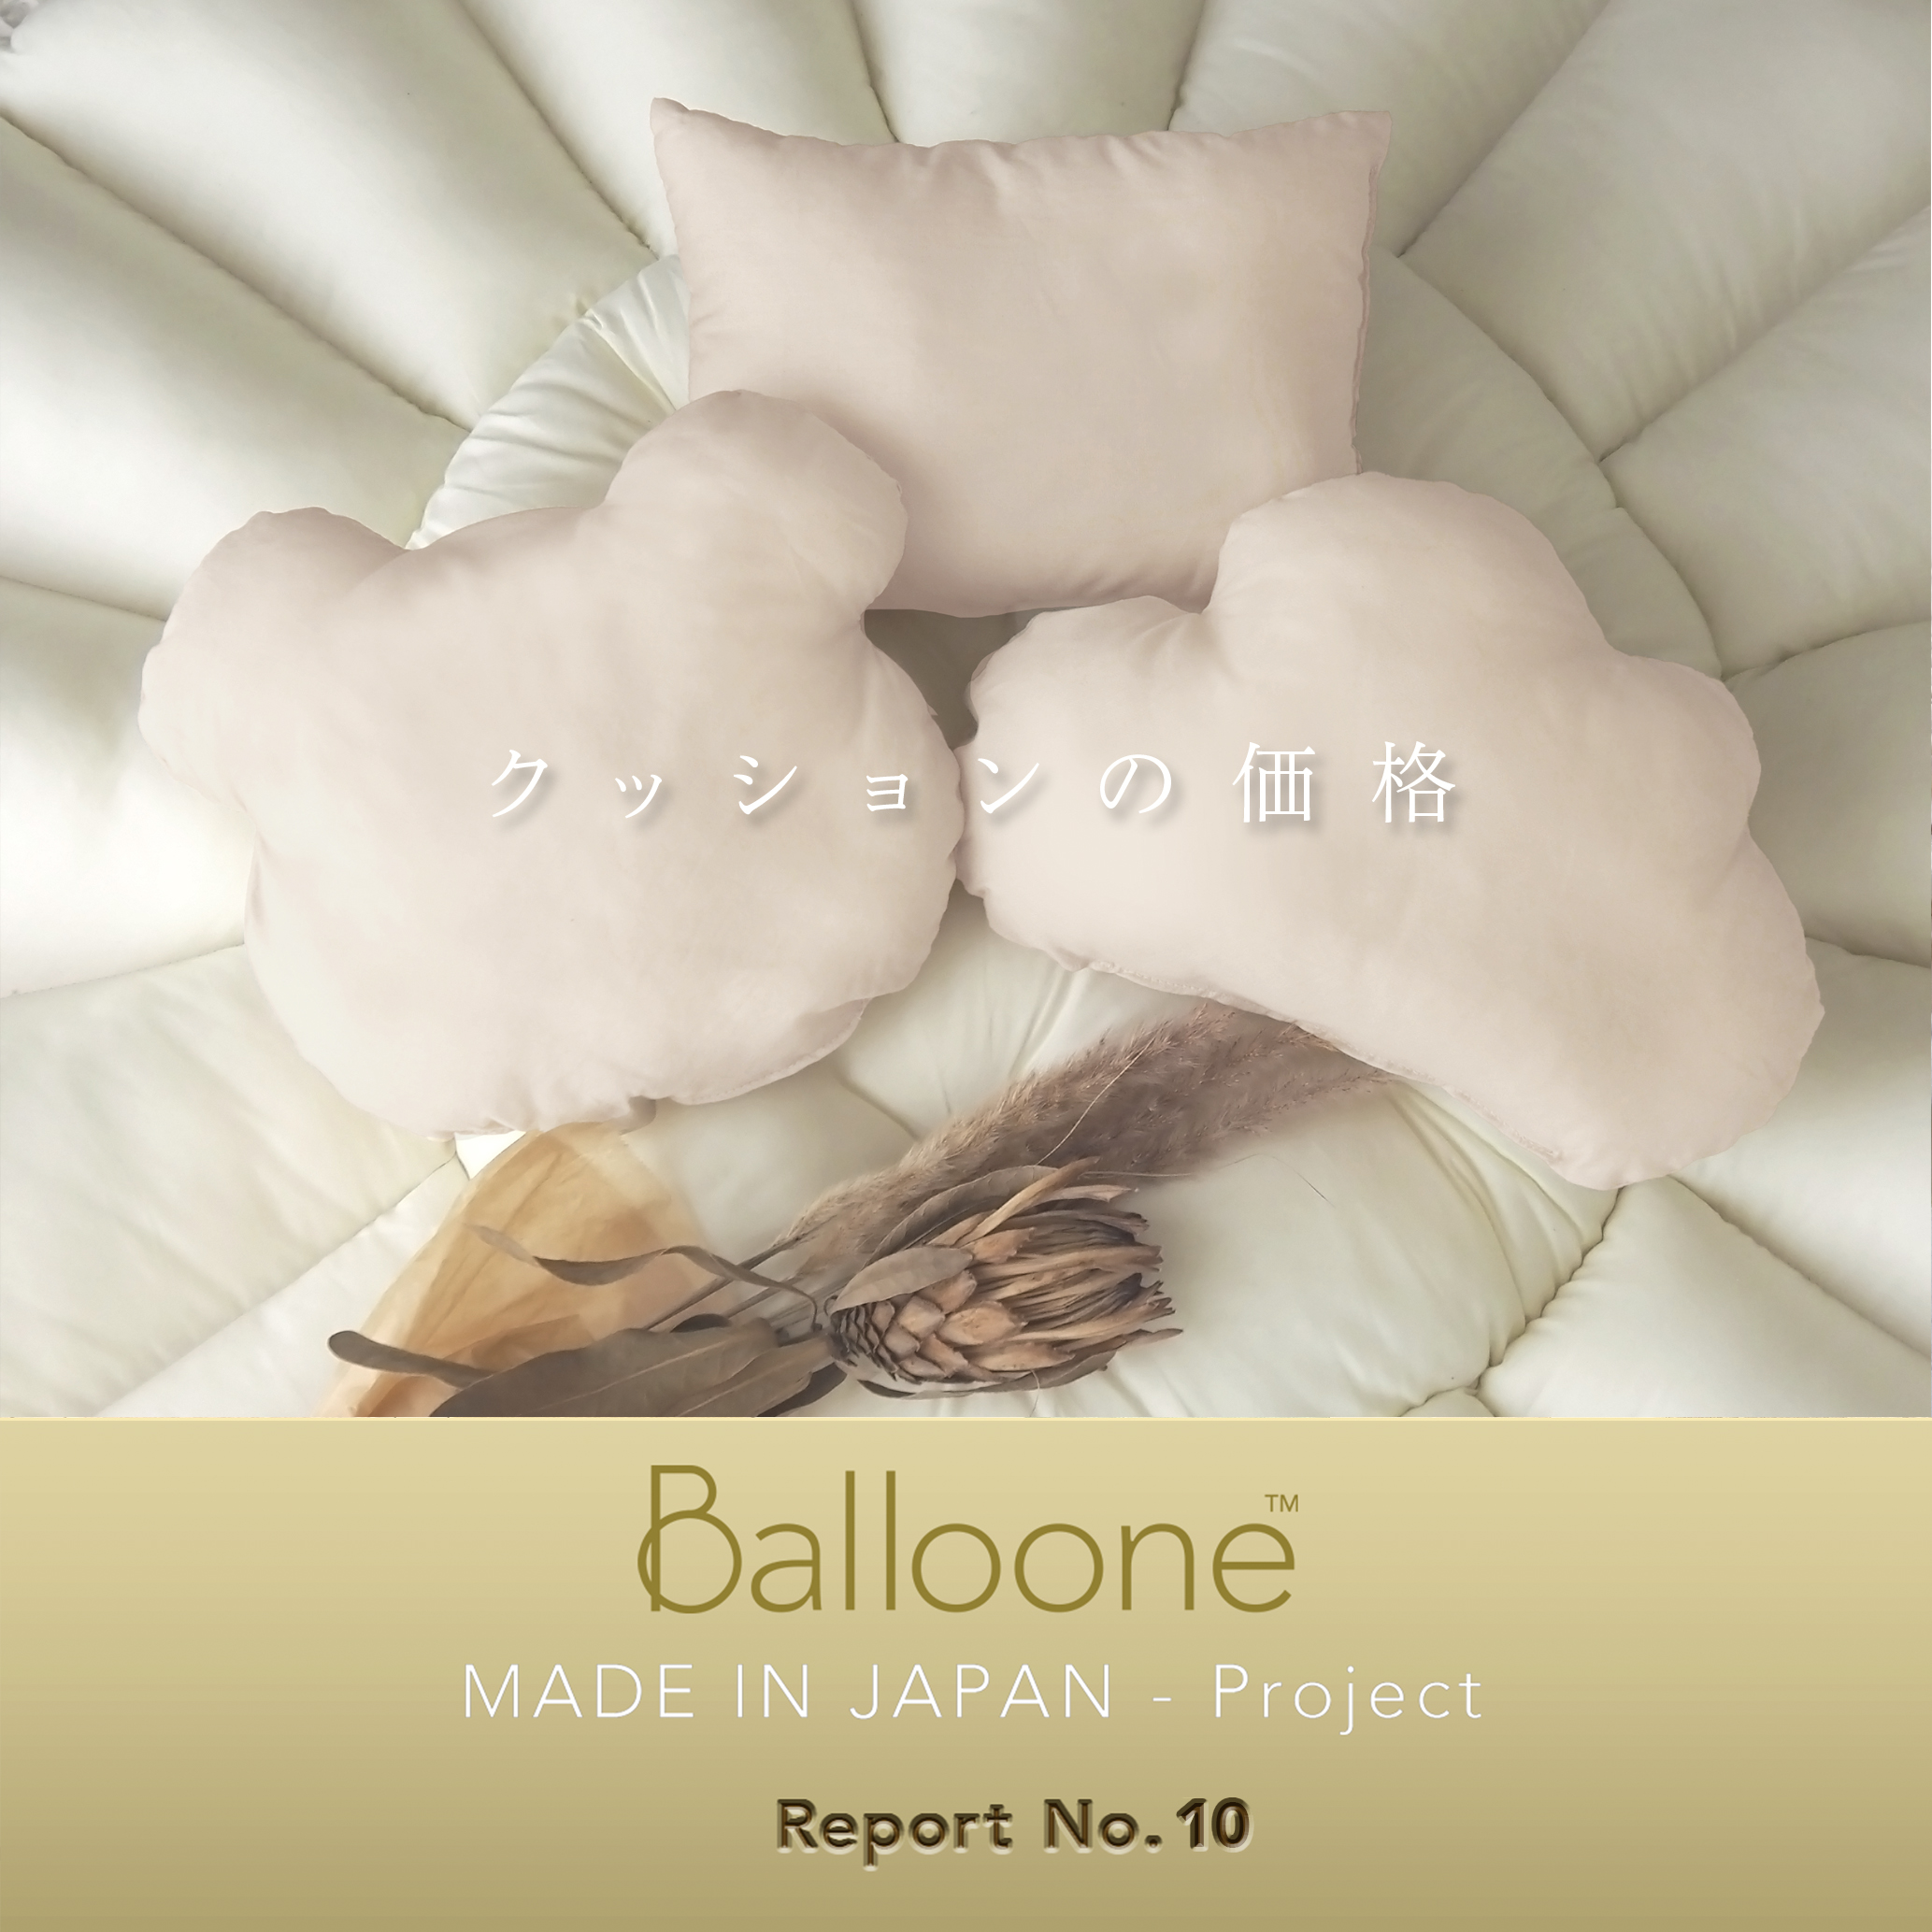 【Balloone／Made in Japan プロジェクト】リポート No.10